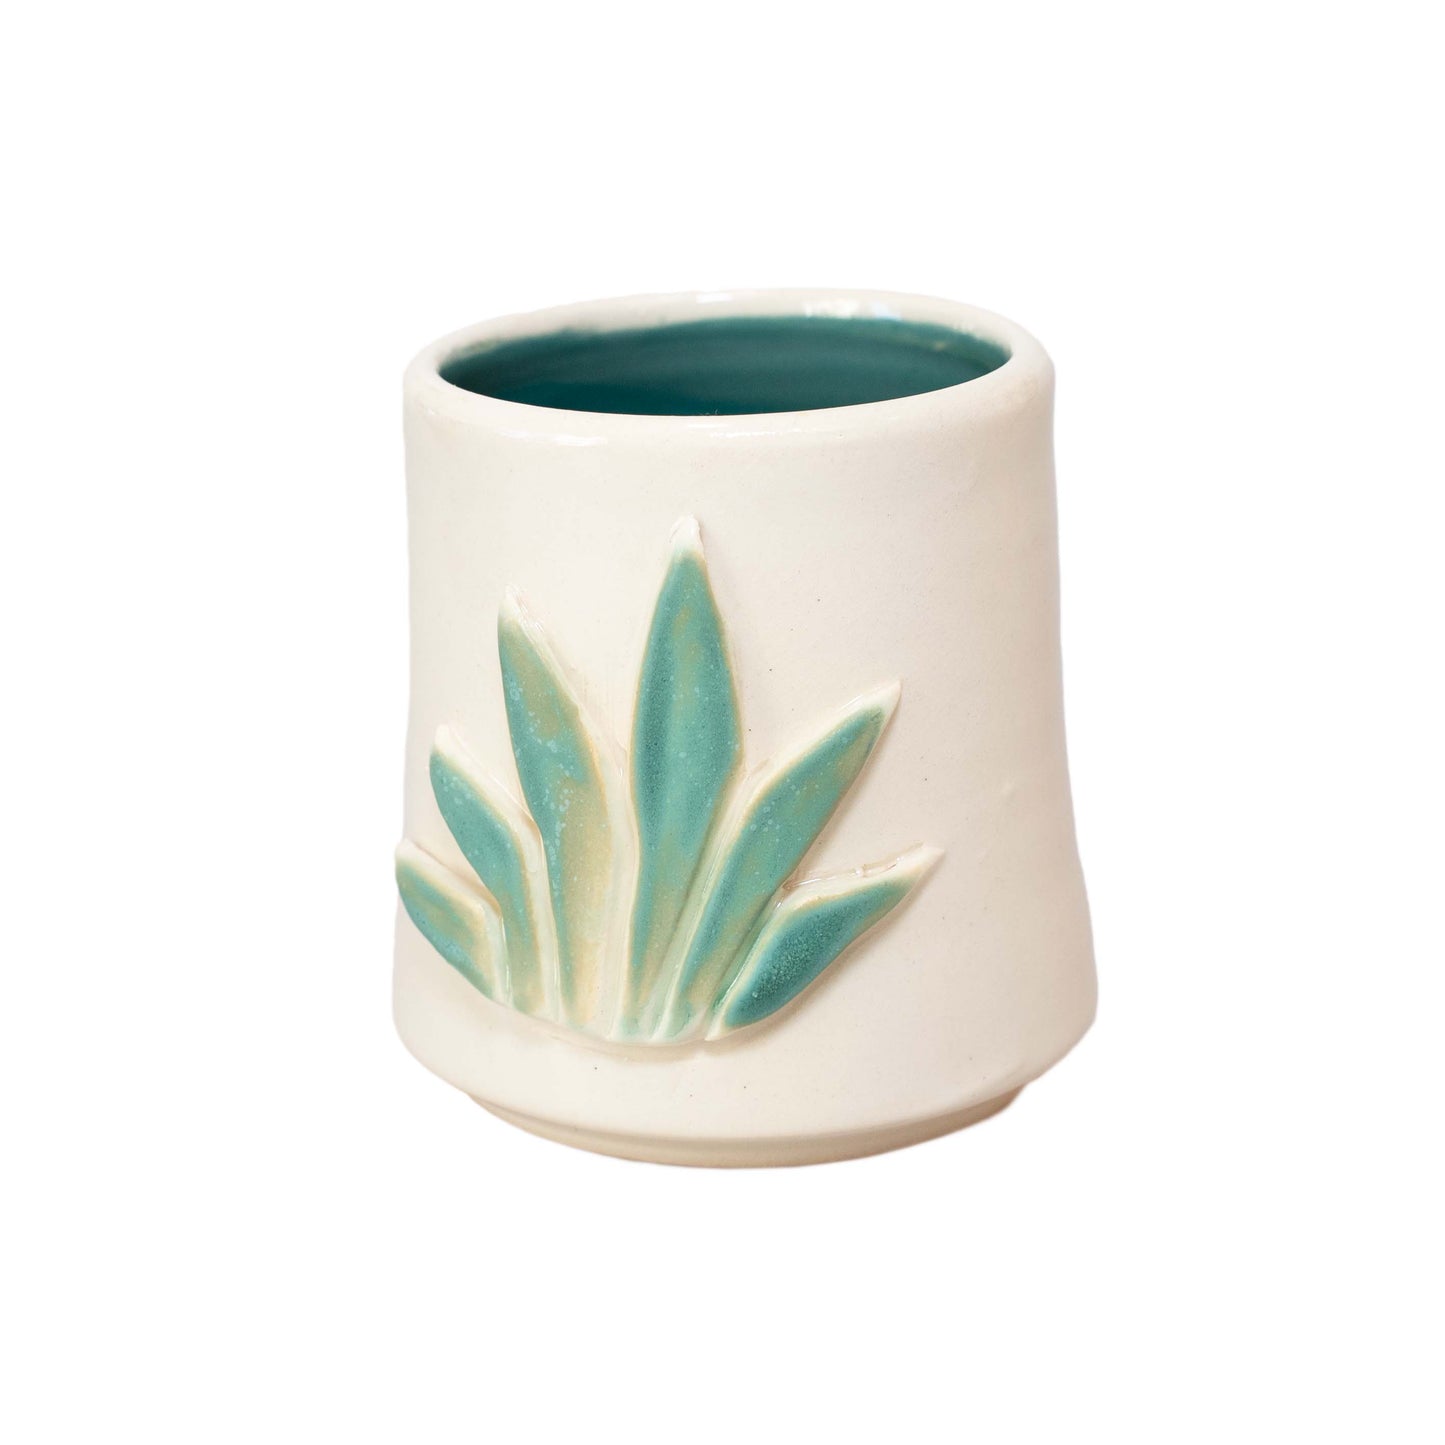 Agave Handmade Ceramic Sipping Cup